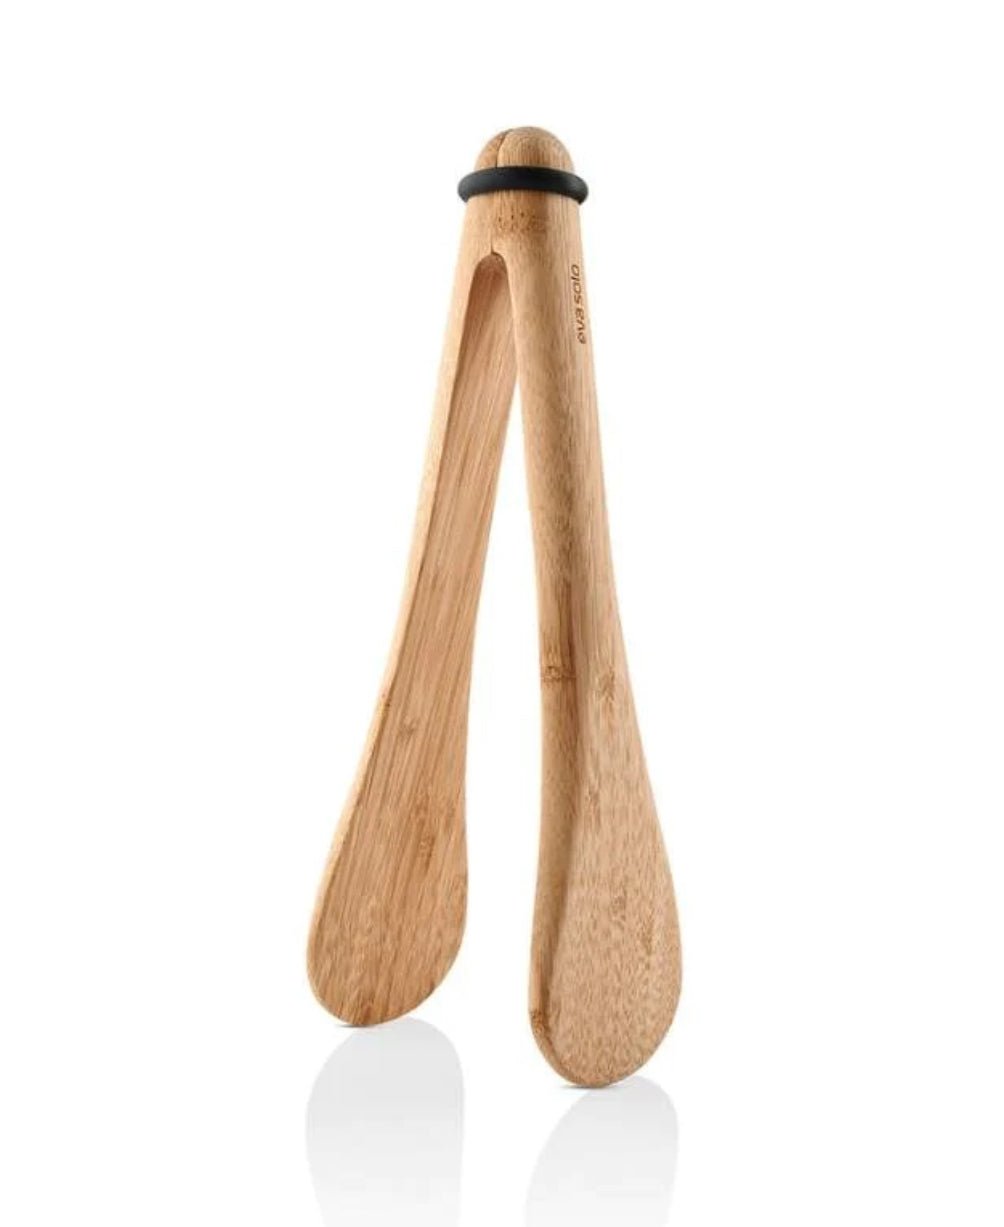 Eva Solo - Nordic Kitchen Serving Tongs - The Flower Crate